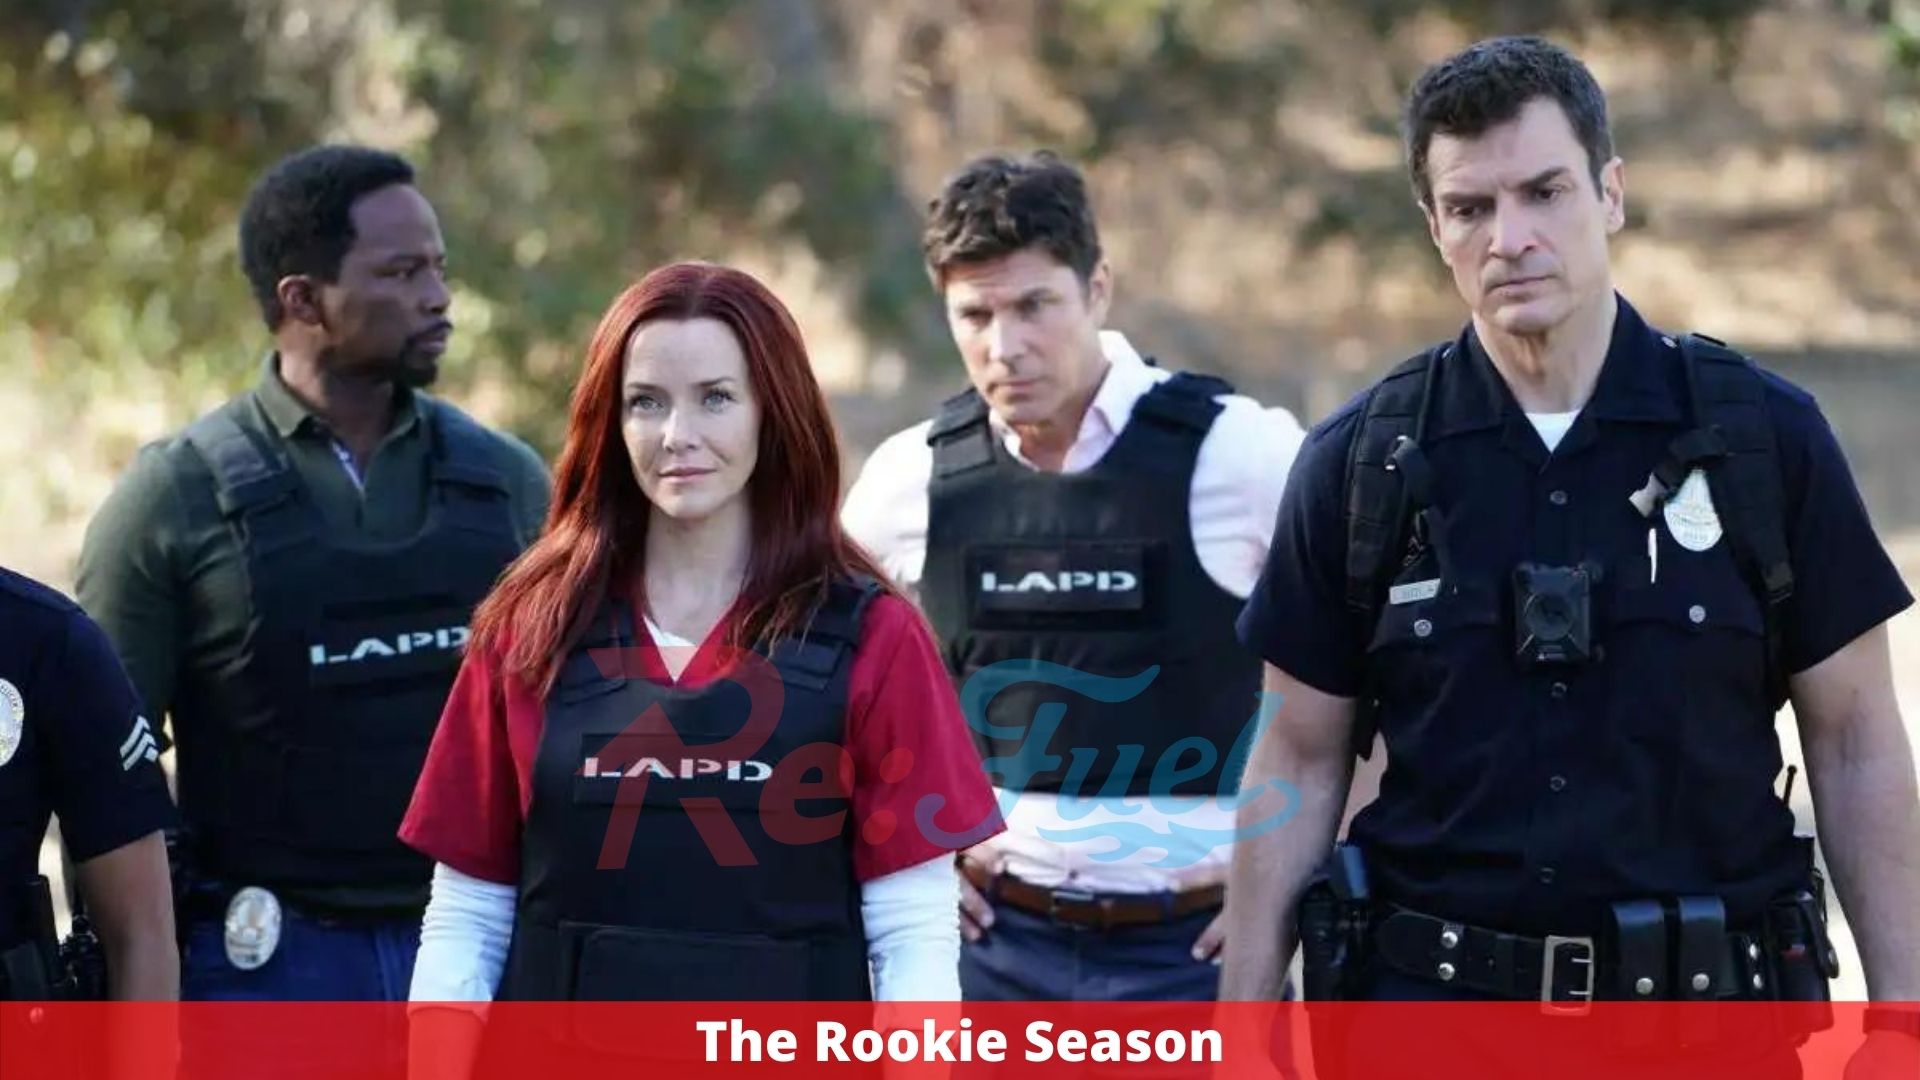 The Rookie Season 4 Episode 22 - Complete Info!